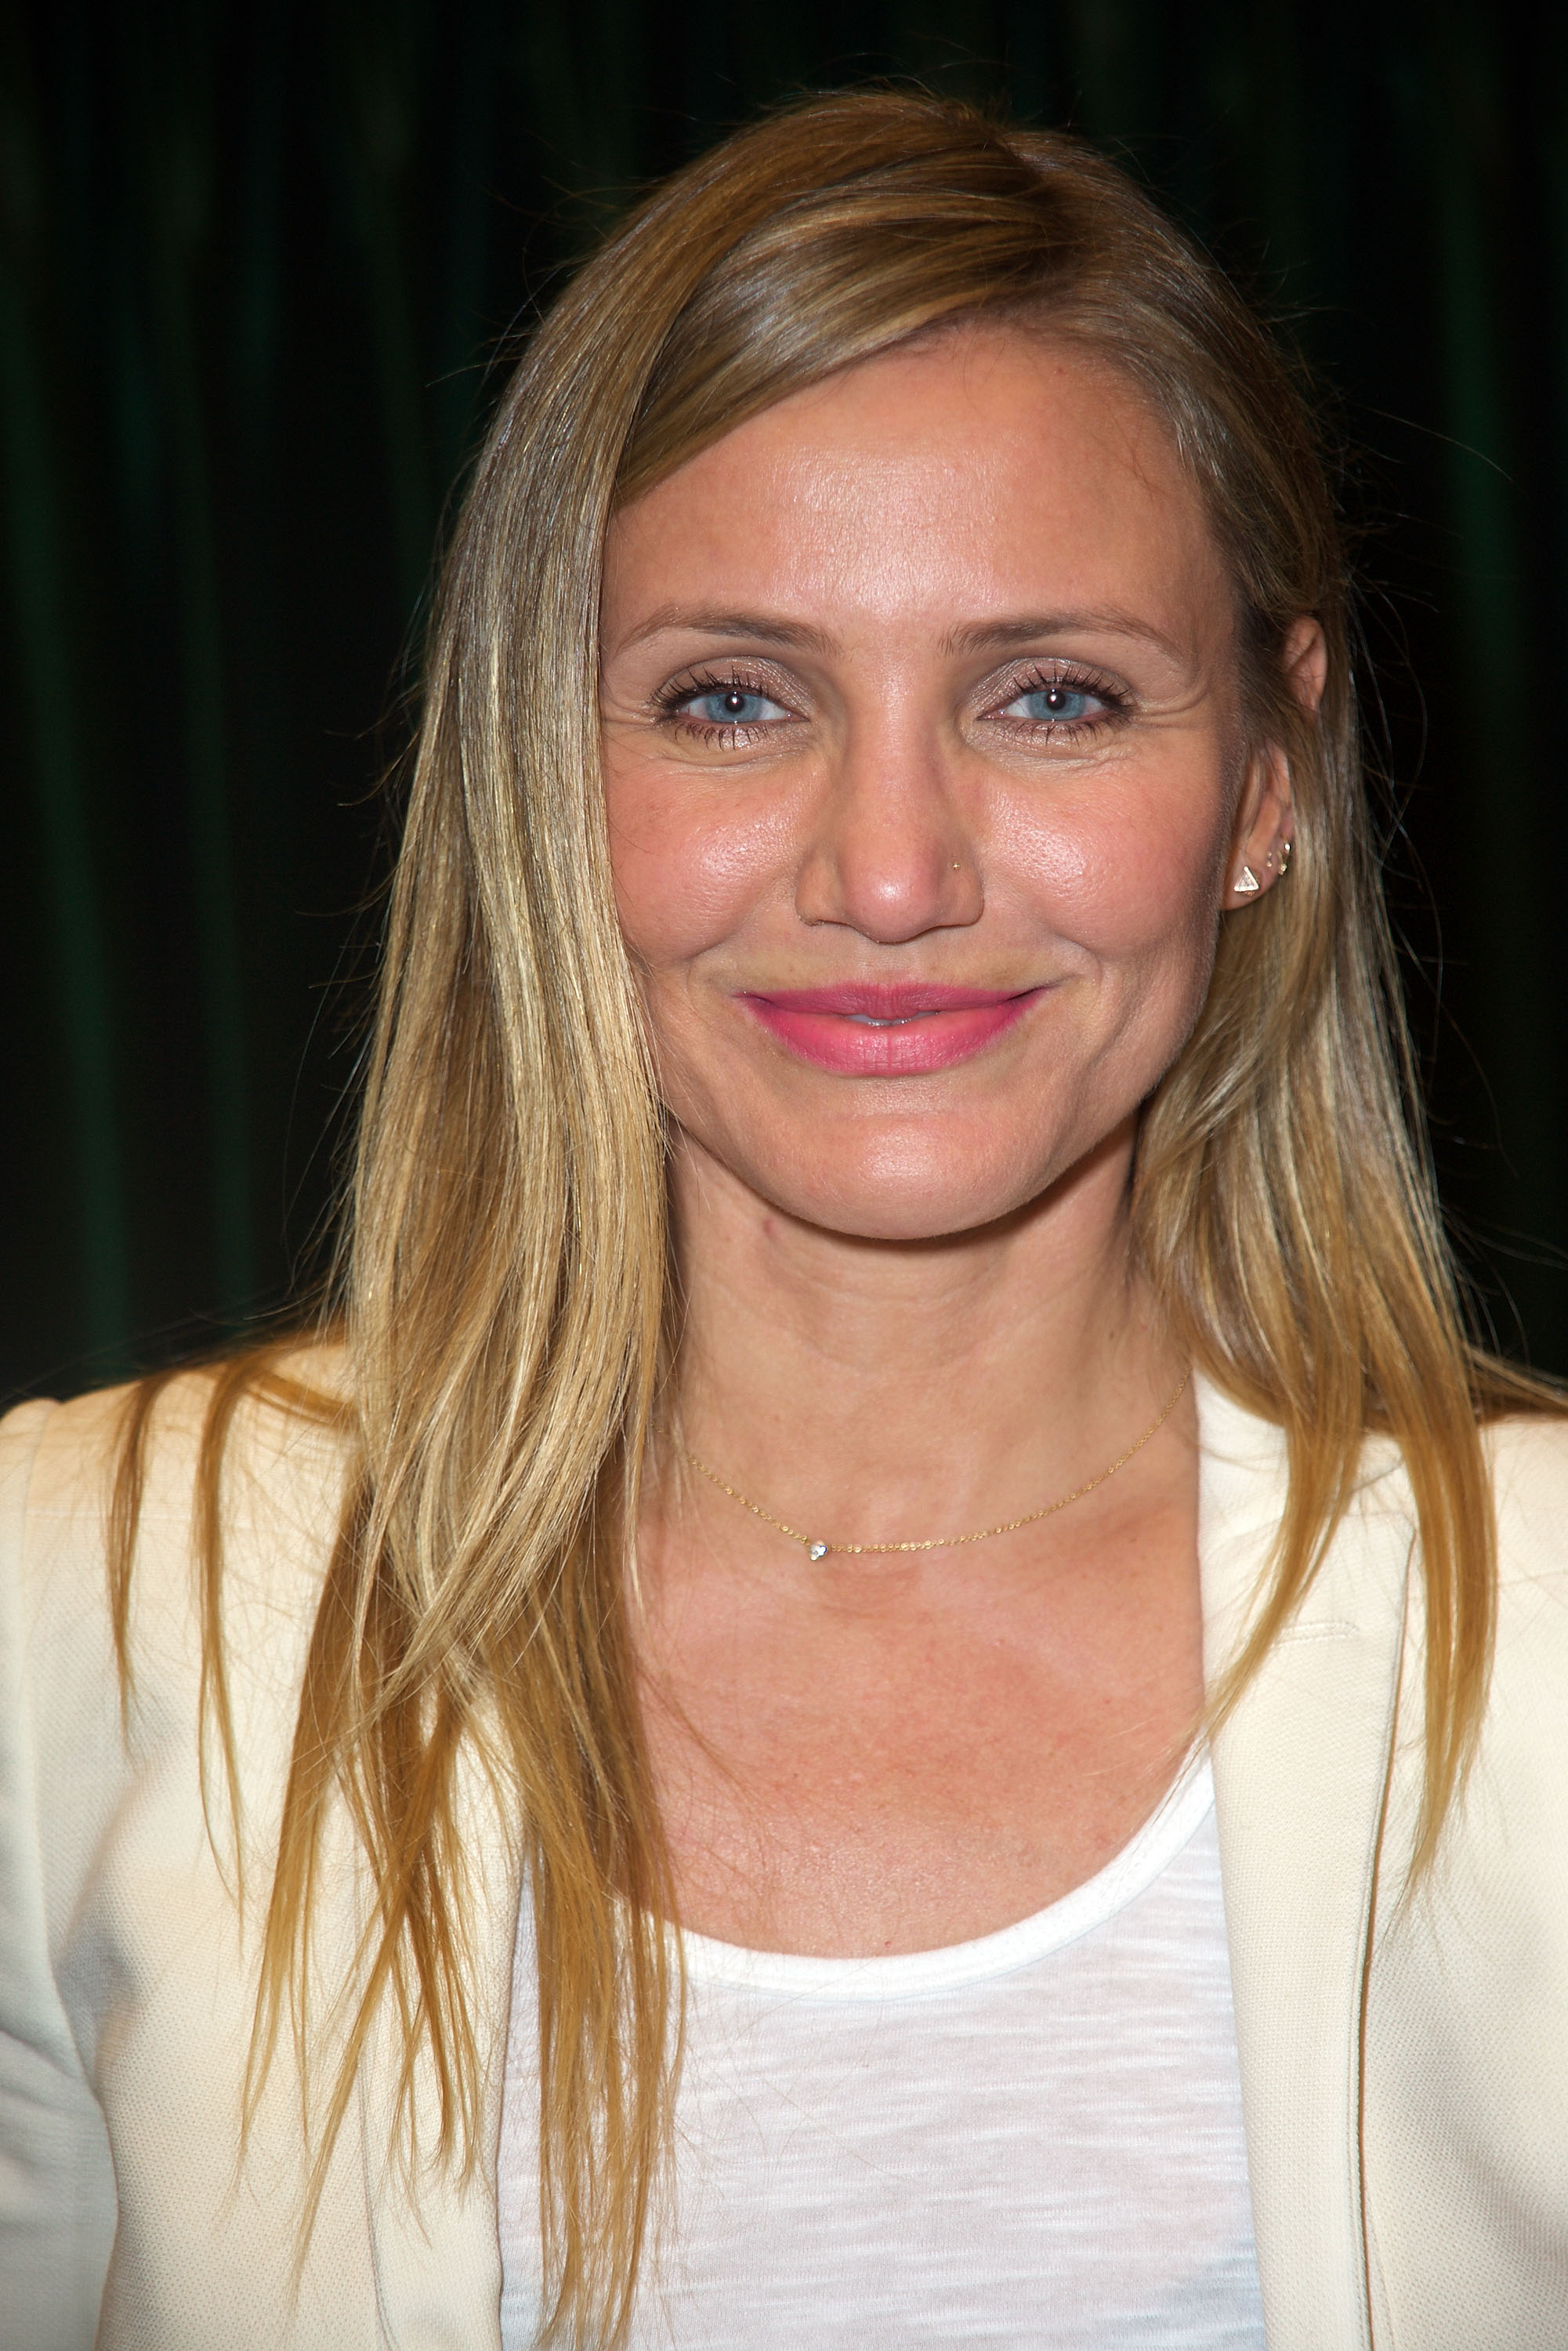 Cameron Diaz at the book signing event for "The Longevity Book" on Independent Book Store Day at Vroman's Bookstore in Pasadena, California on April 30, 2016 | Source: Getty Images